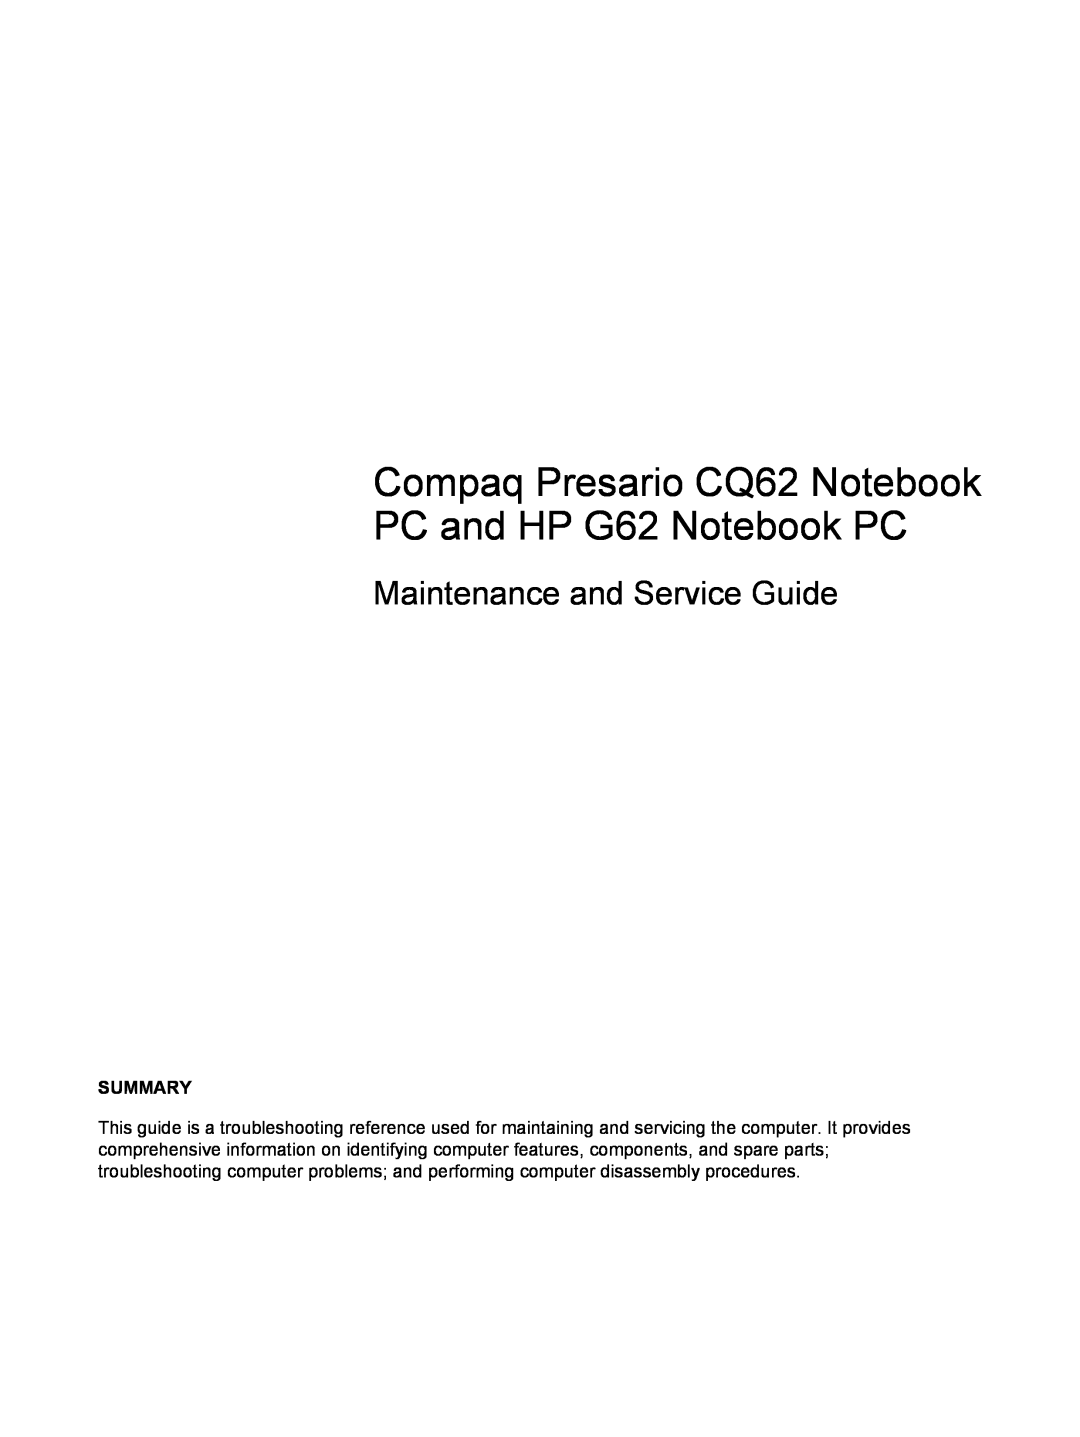 HP CQ62-231NR manual Summary, Compaq Presario CQ62 Notebook PC and HP G62 Notebook PC, Maintenance and Service Guide 